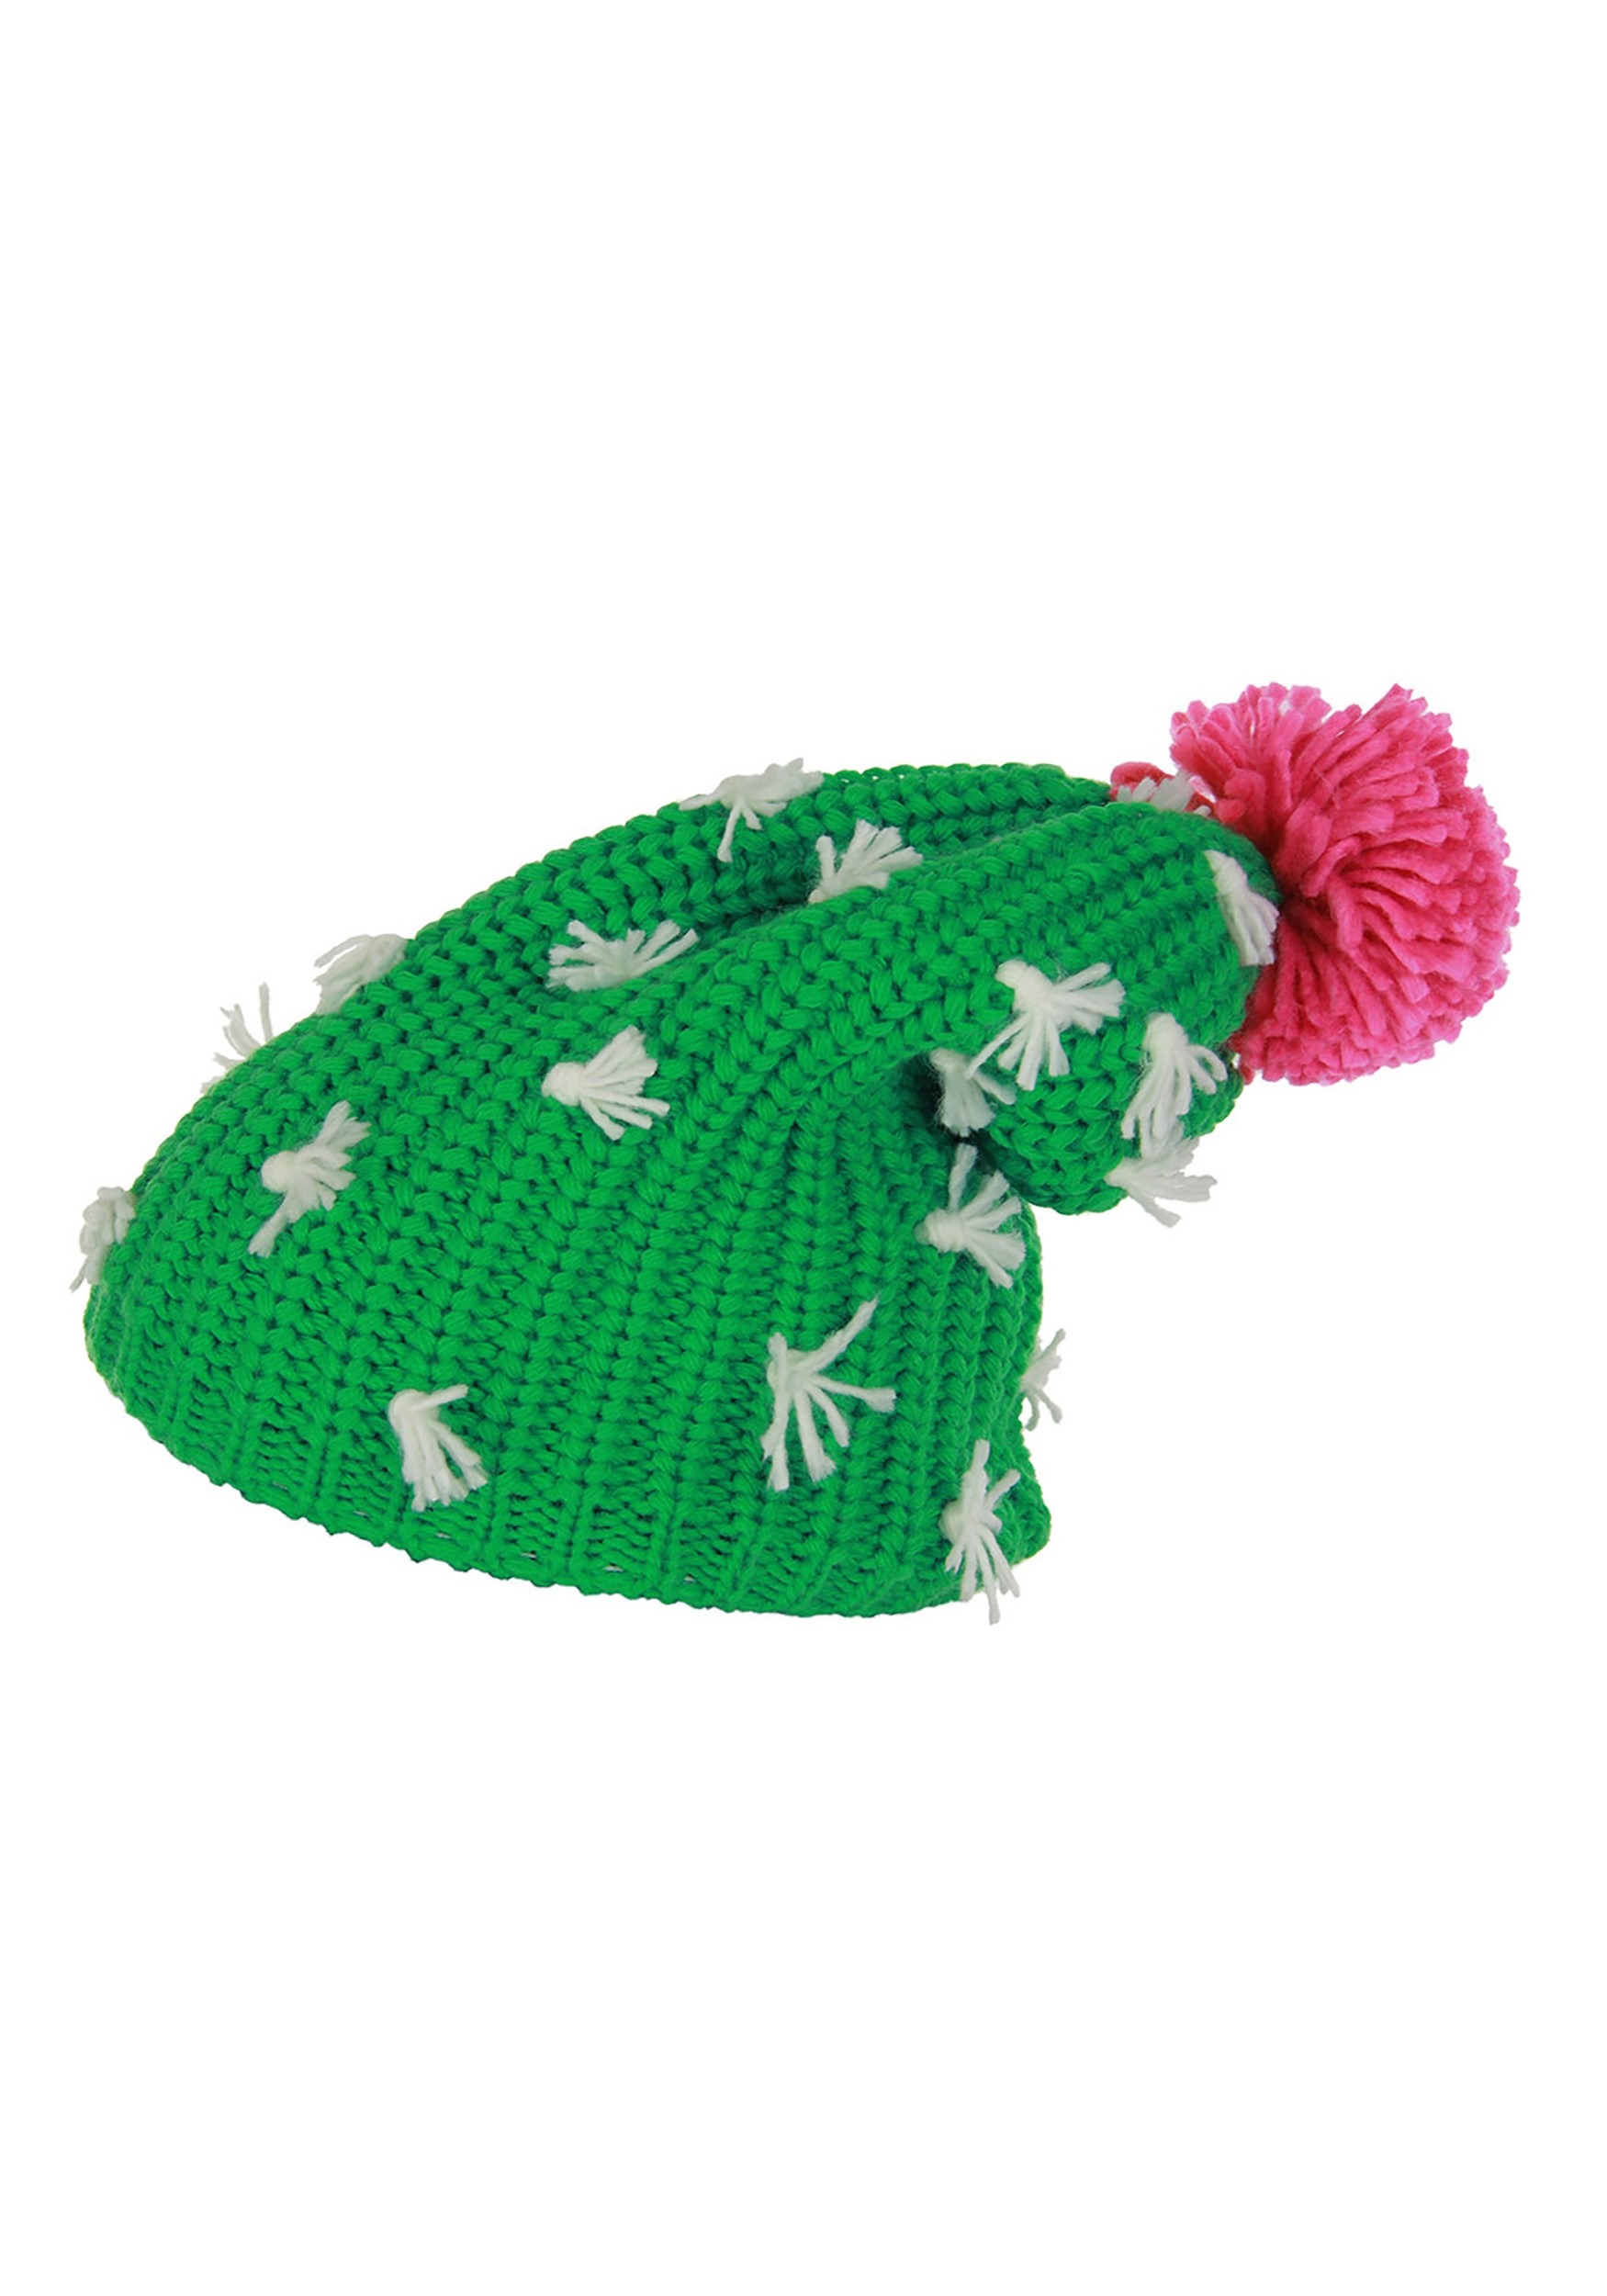 Adult Knit Cactus Slouch Beanie , Knitted Adult Hat